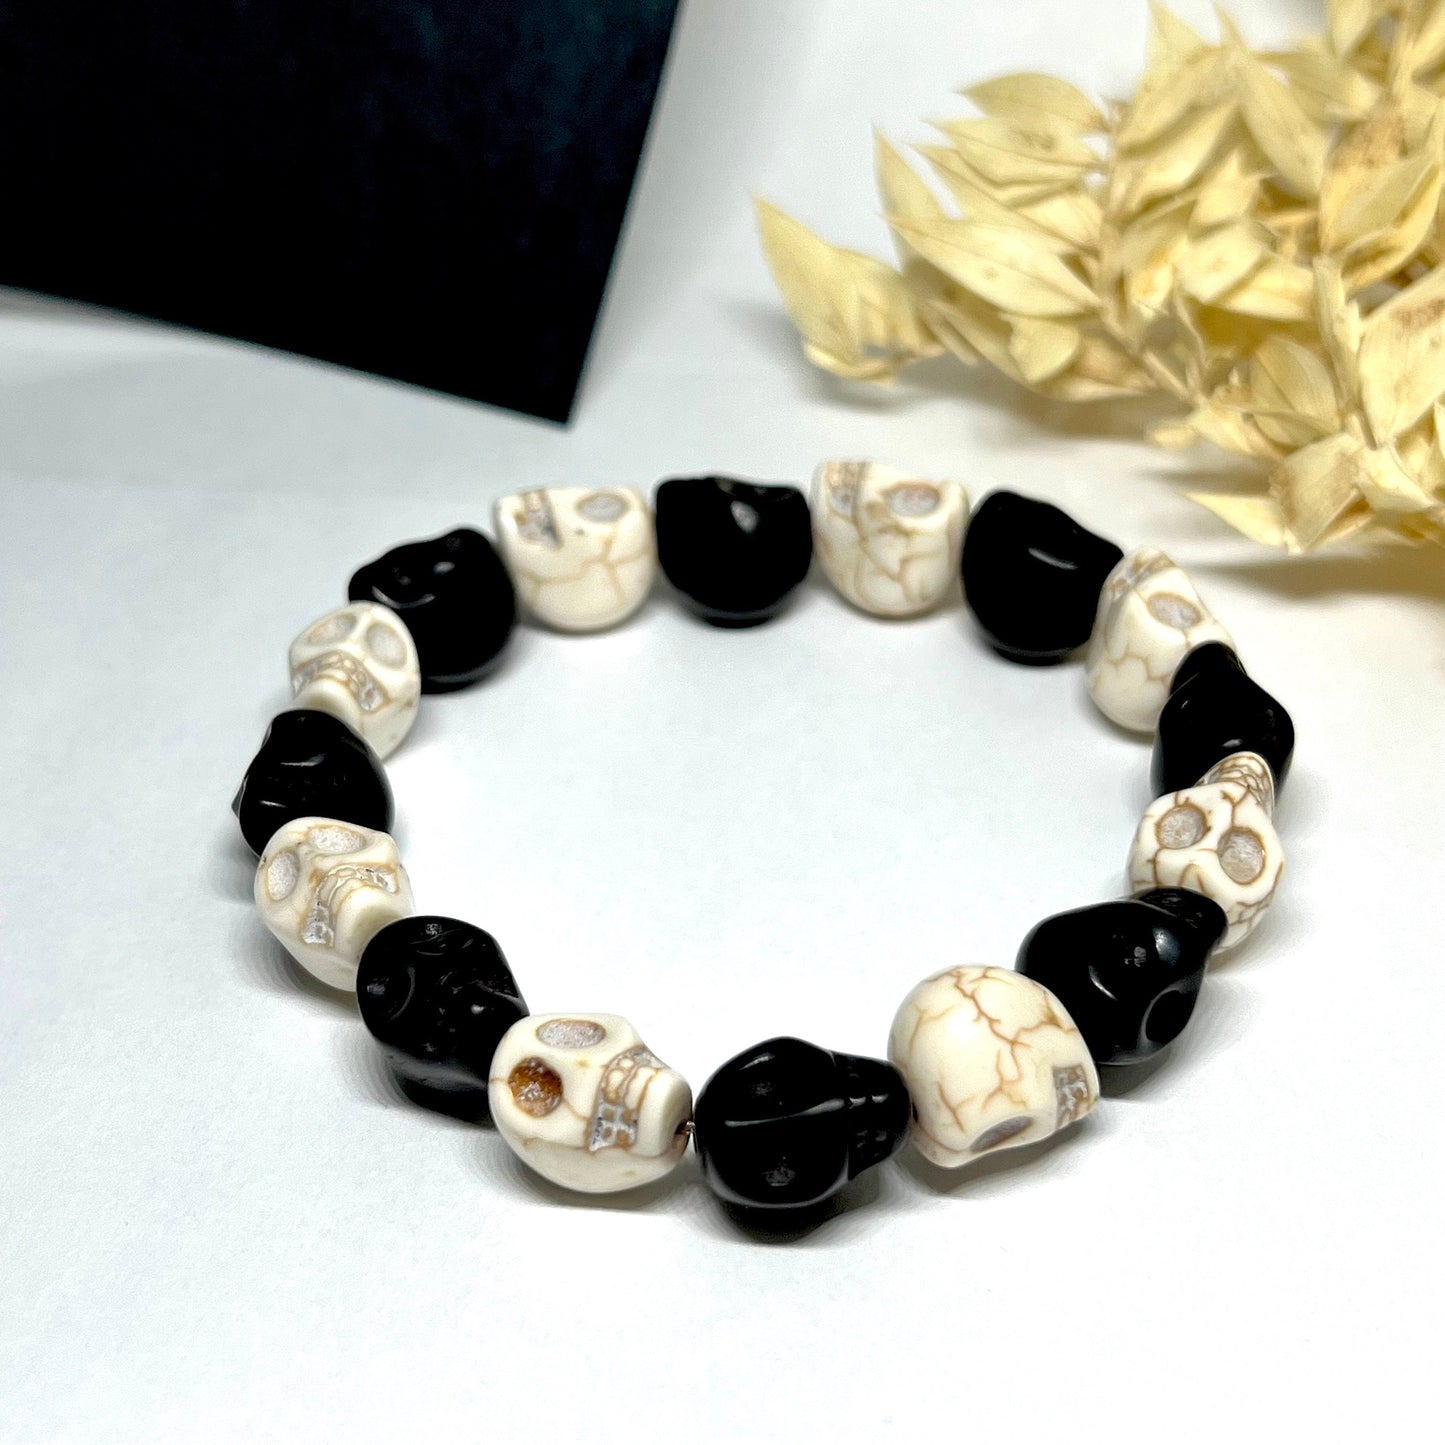 Skull Beaded Wristband Bracelet Black and White Beads Unisex Day of the Dead Jewelry Gift for Him or Her Halloween Fashion Calaveras Pulsera